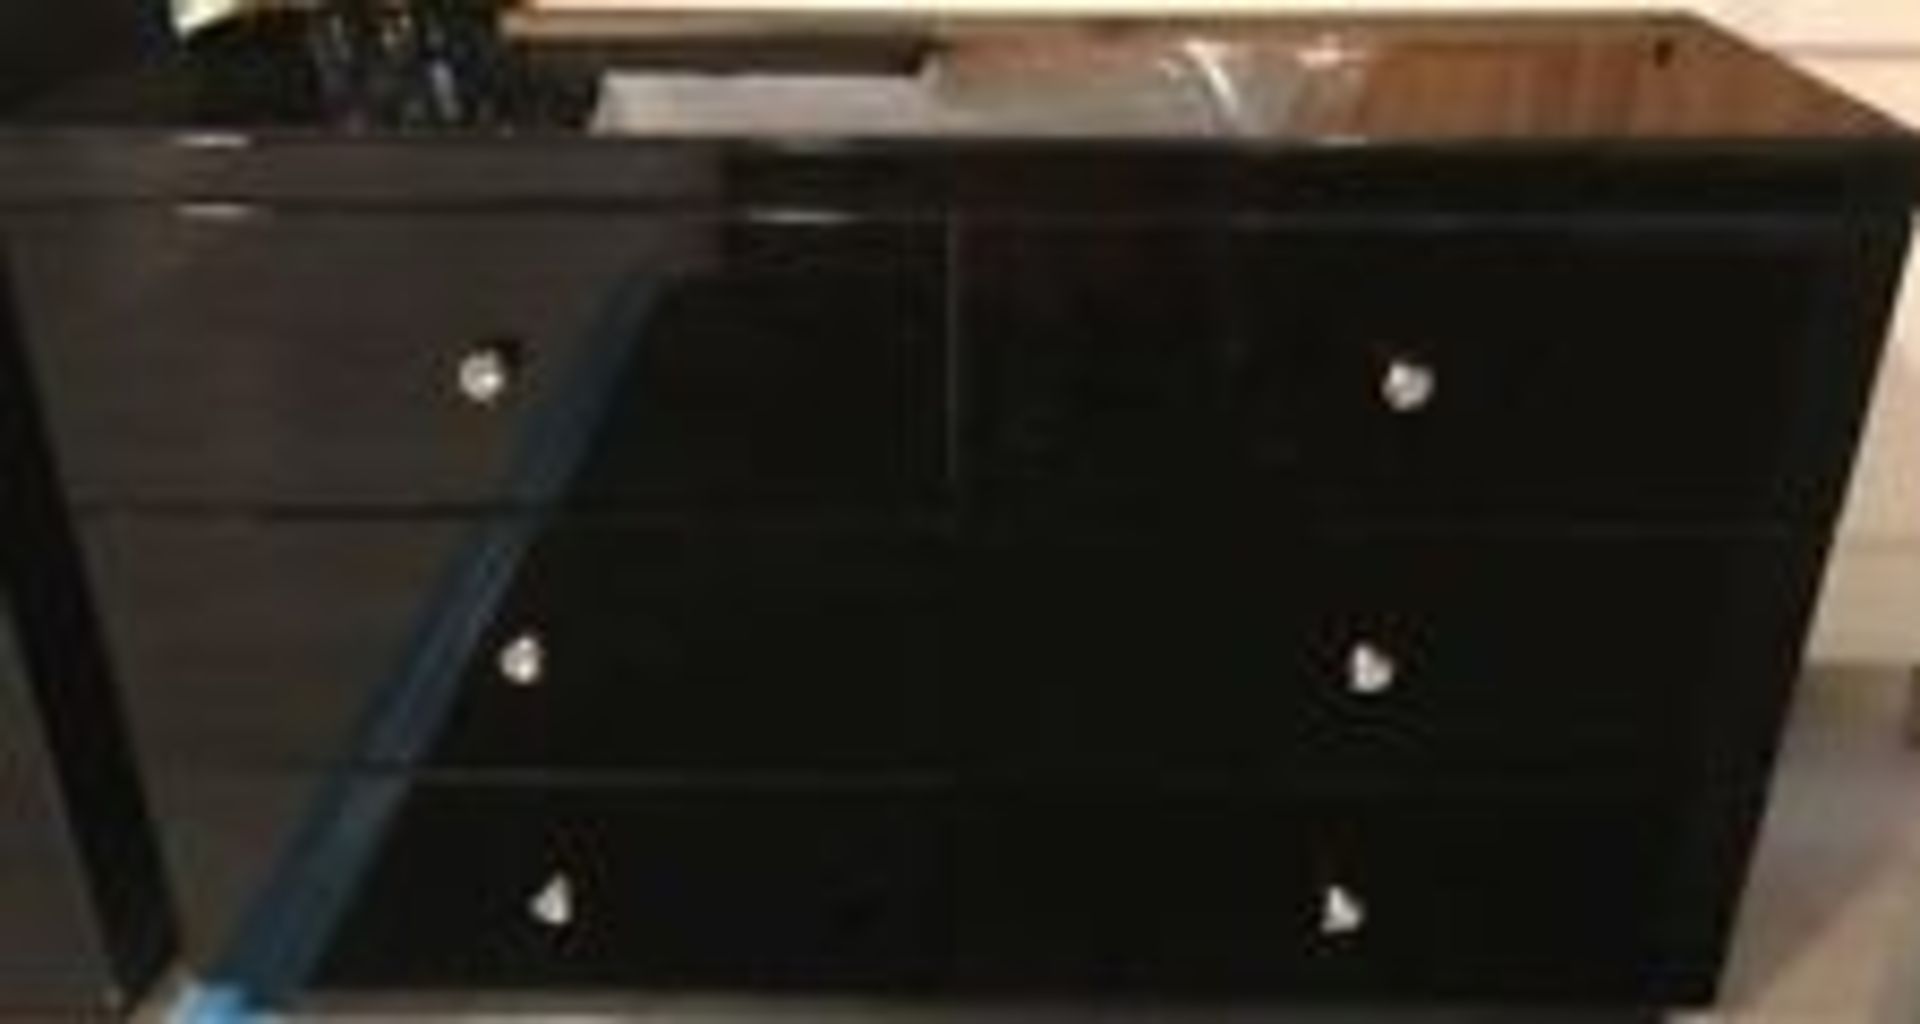 Brand new direct from the manufacturers the shard glass diamond black 3 + 3 drawer chest, made